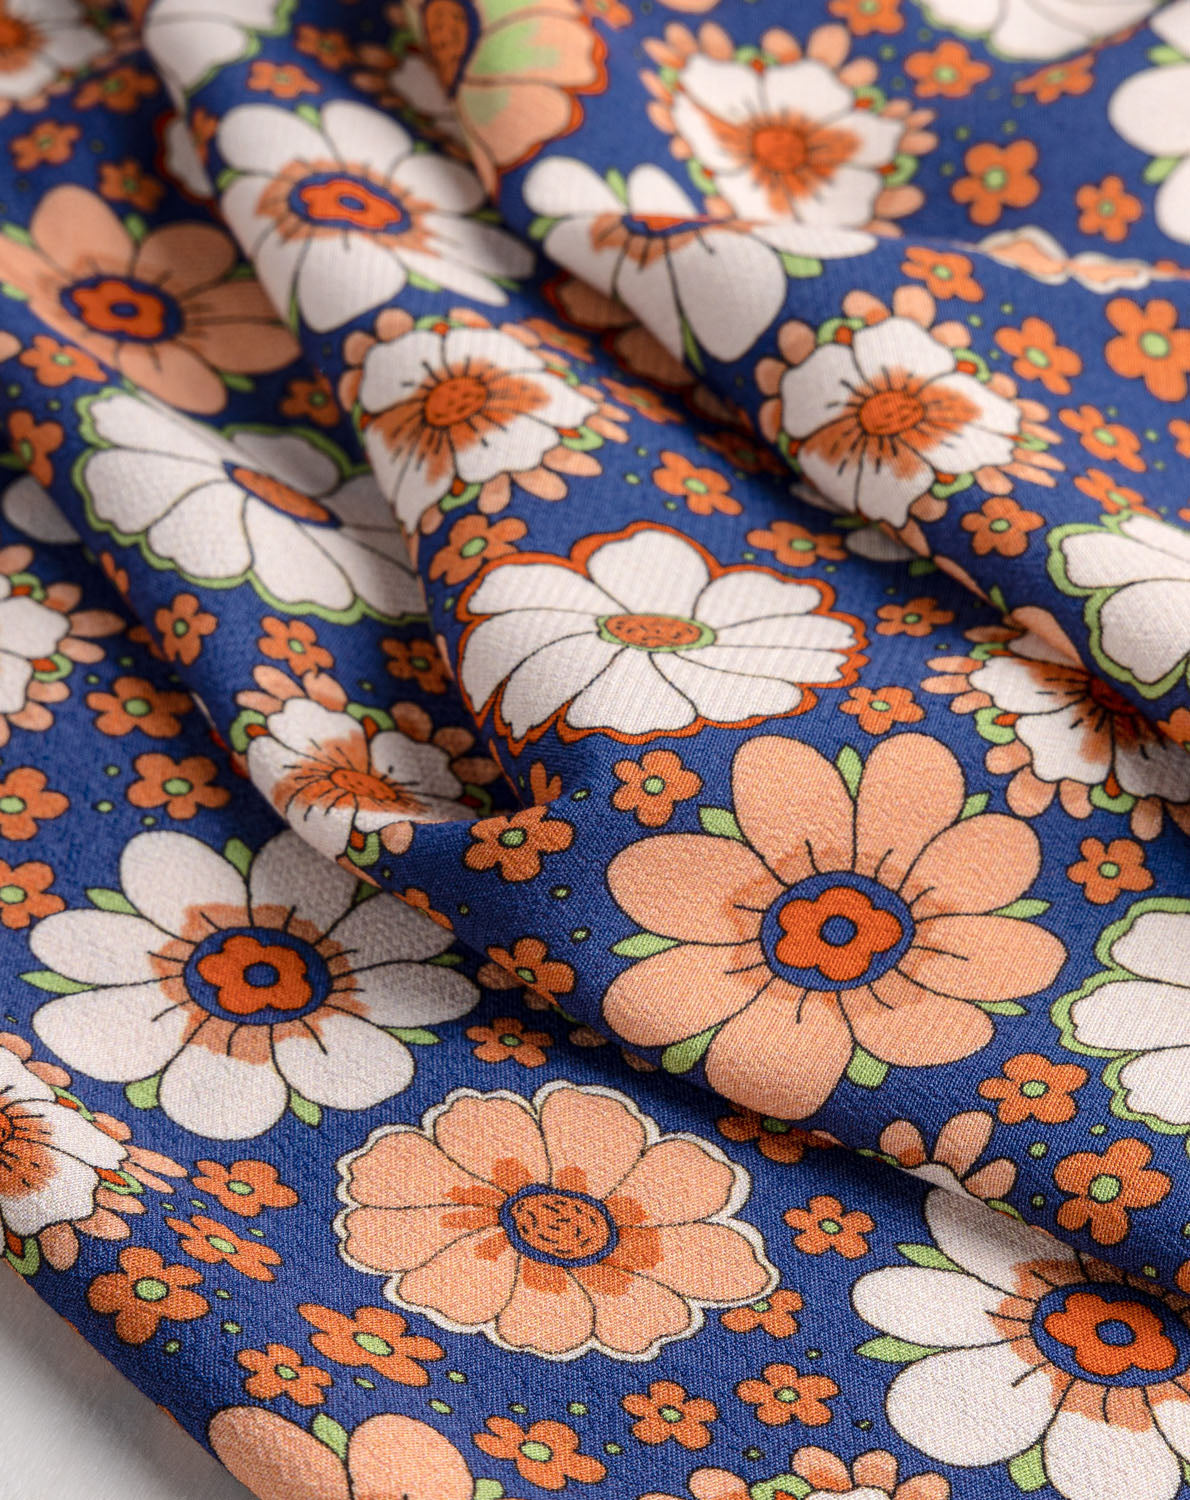 Printed Stretch Crepe Fabric  Design Your Own Crepe Fabric